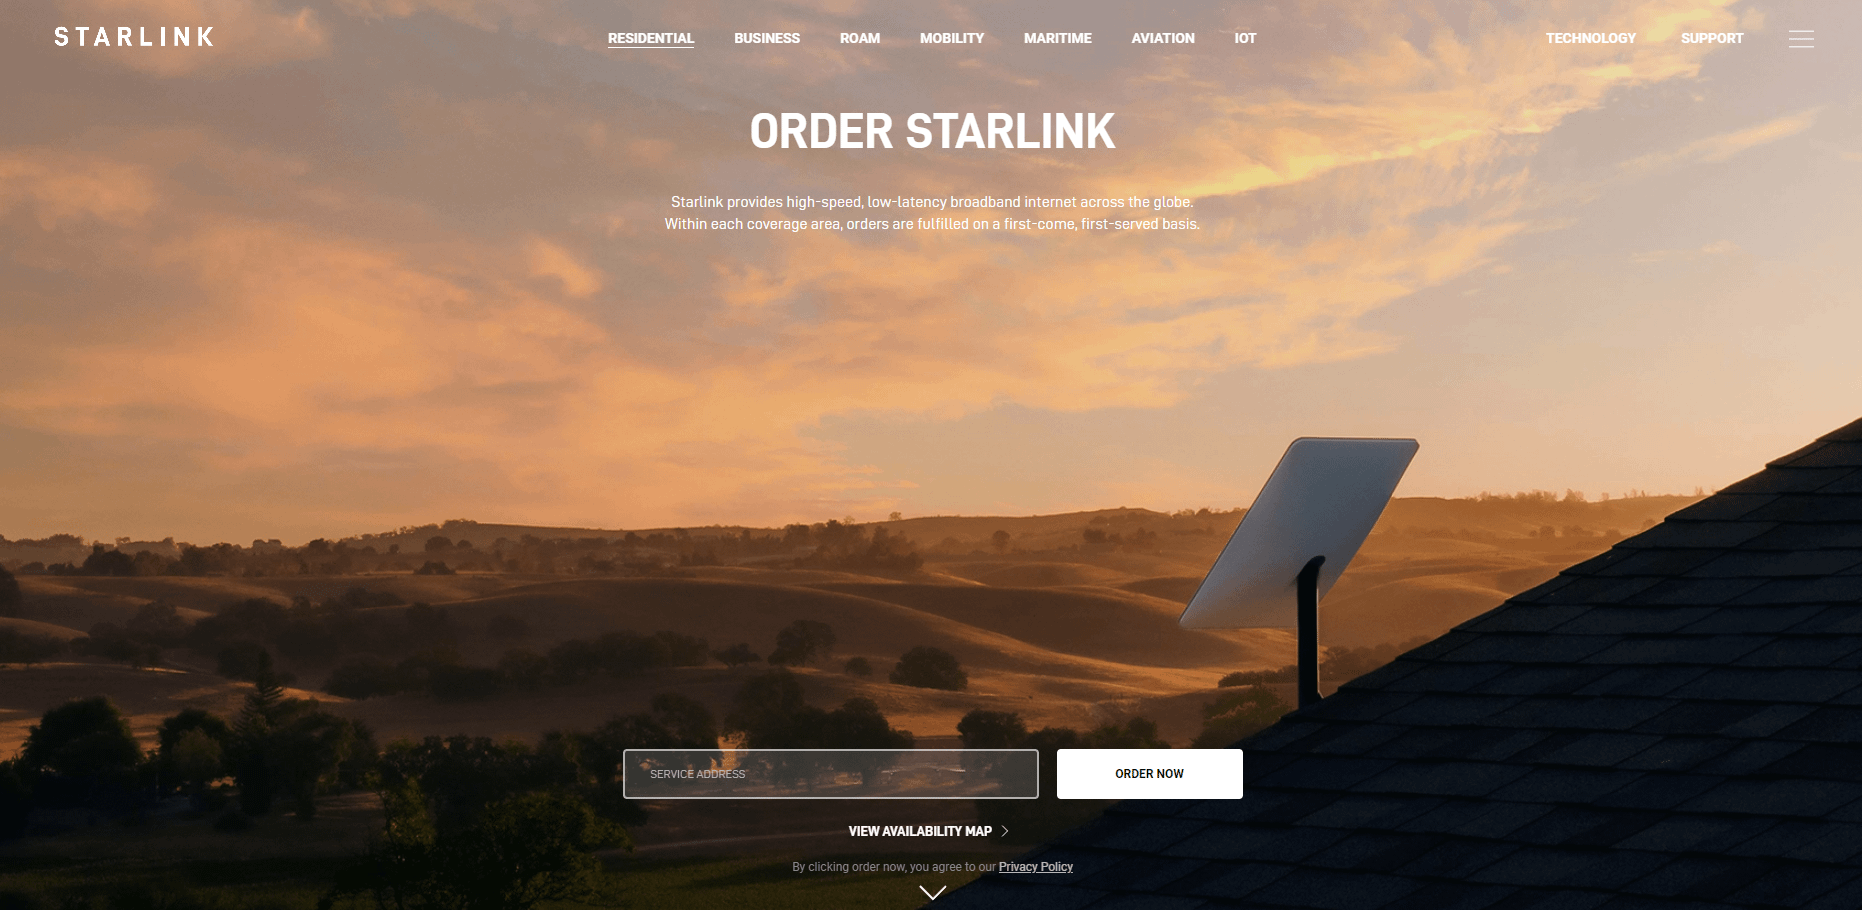 How to Buy Starlink Stock: Starlink homepage